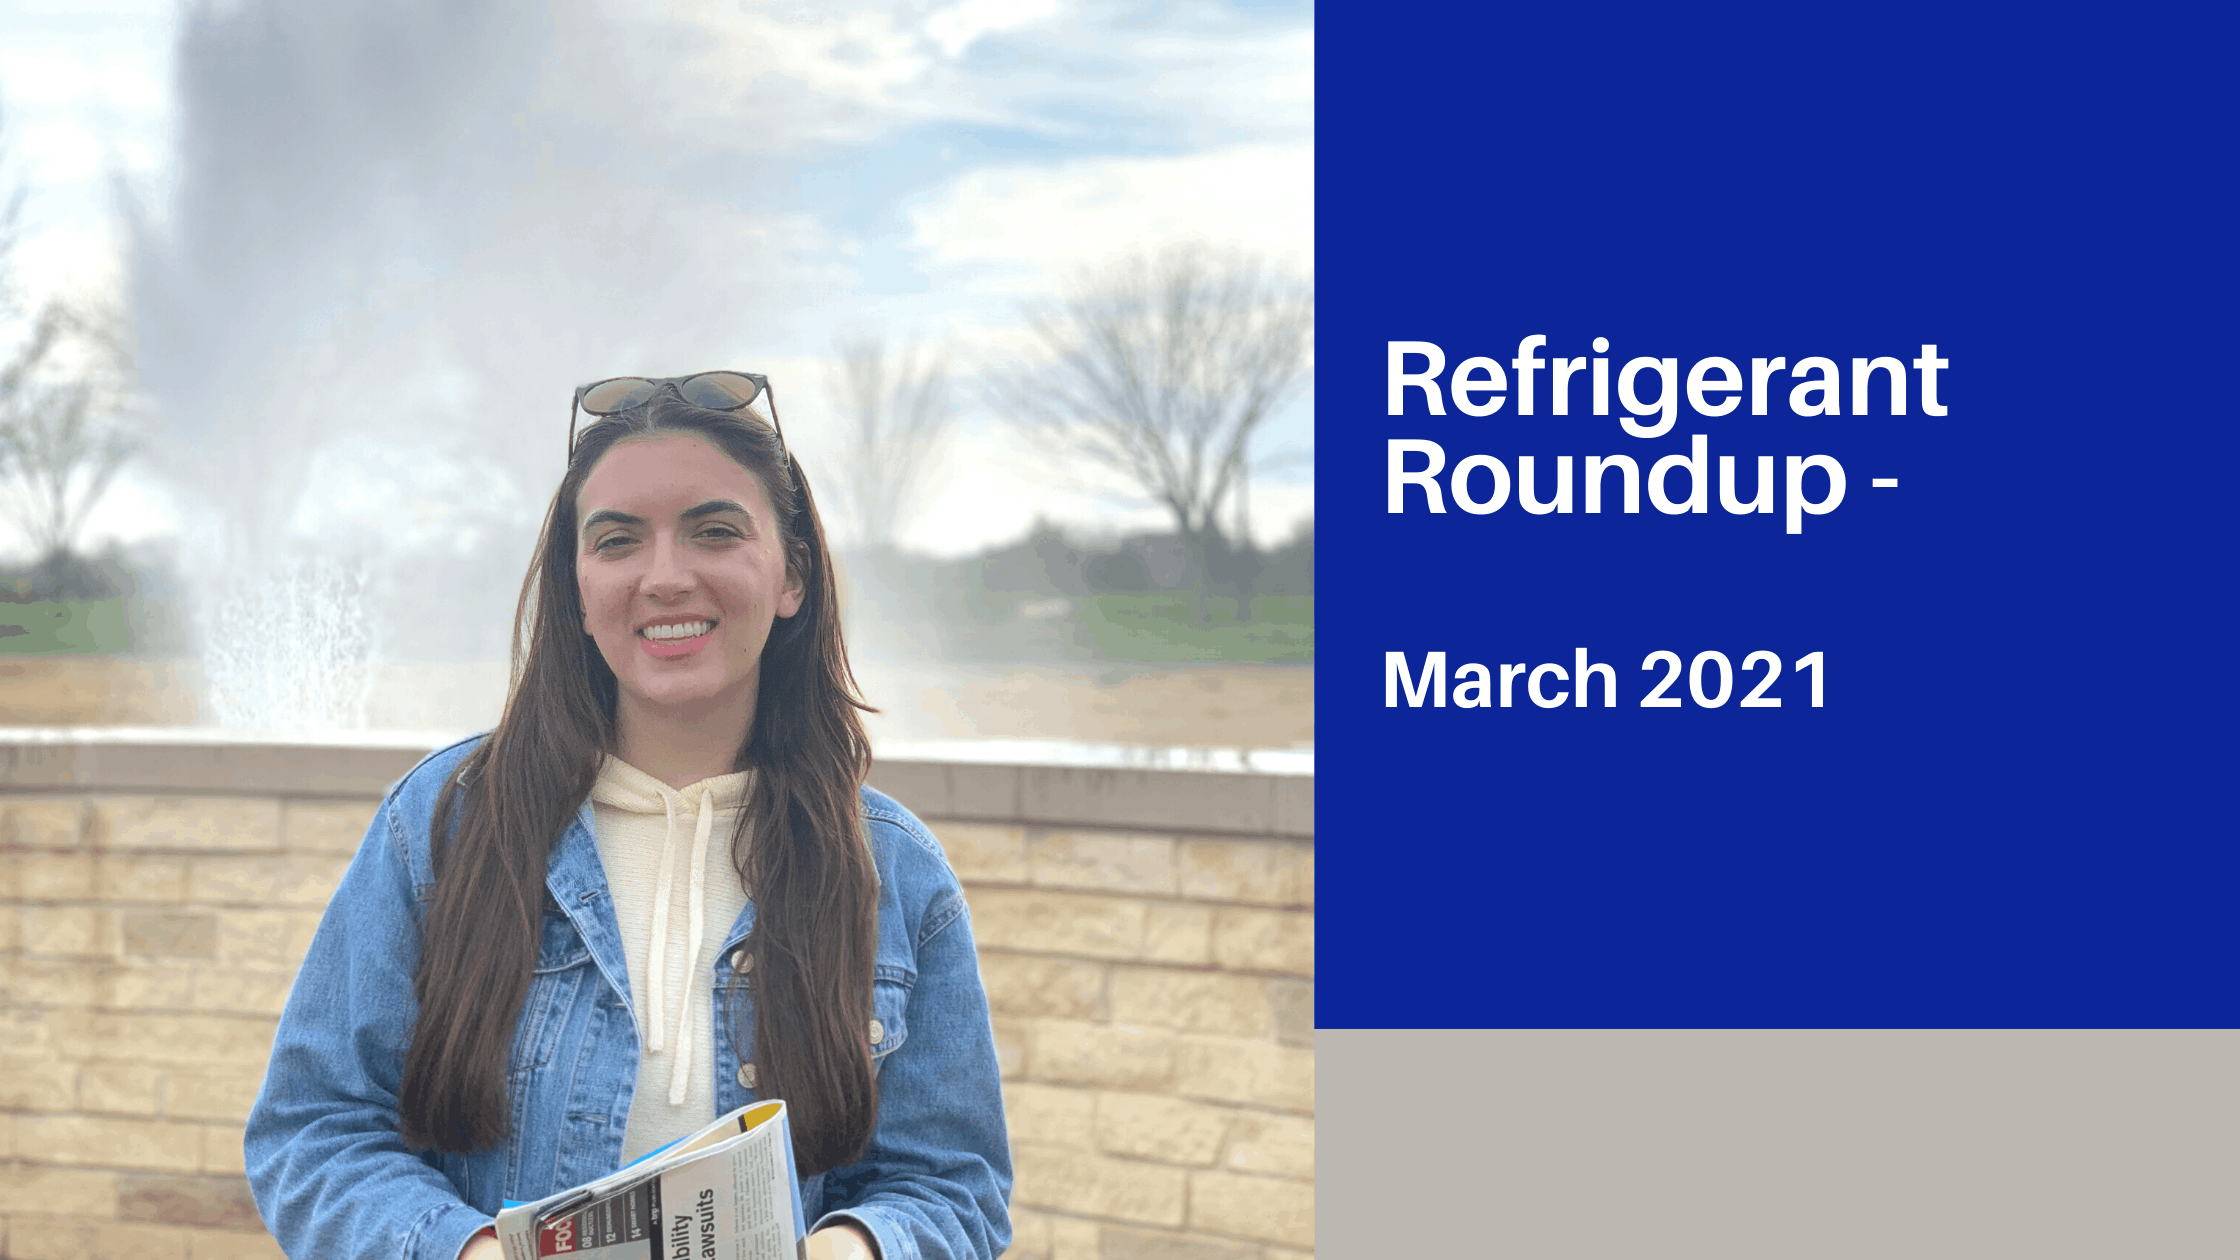 You are currently viewing Refrigerant Roundup for March 2021